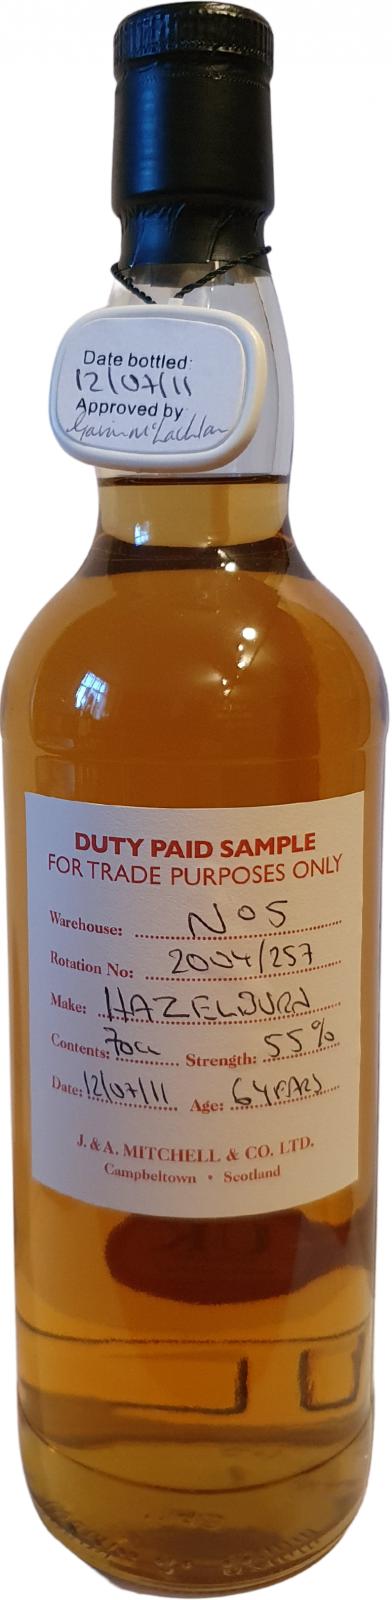 Hazelburn 2004 Duty Paid Sample For Trade Purposes Only Fresh sherry Rotation 2004 257 55% 700ml